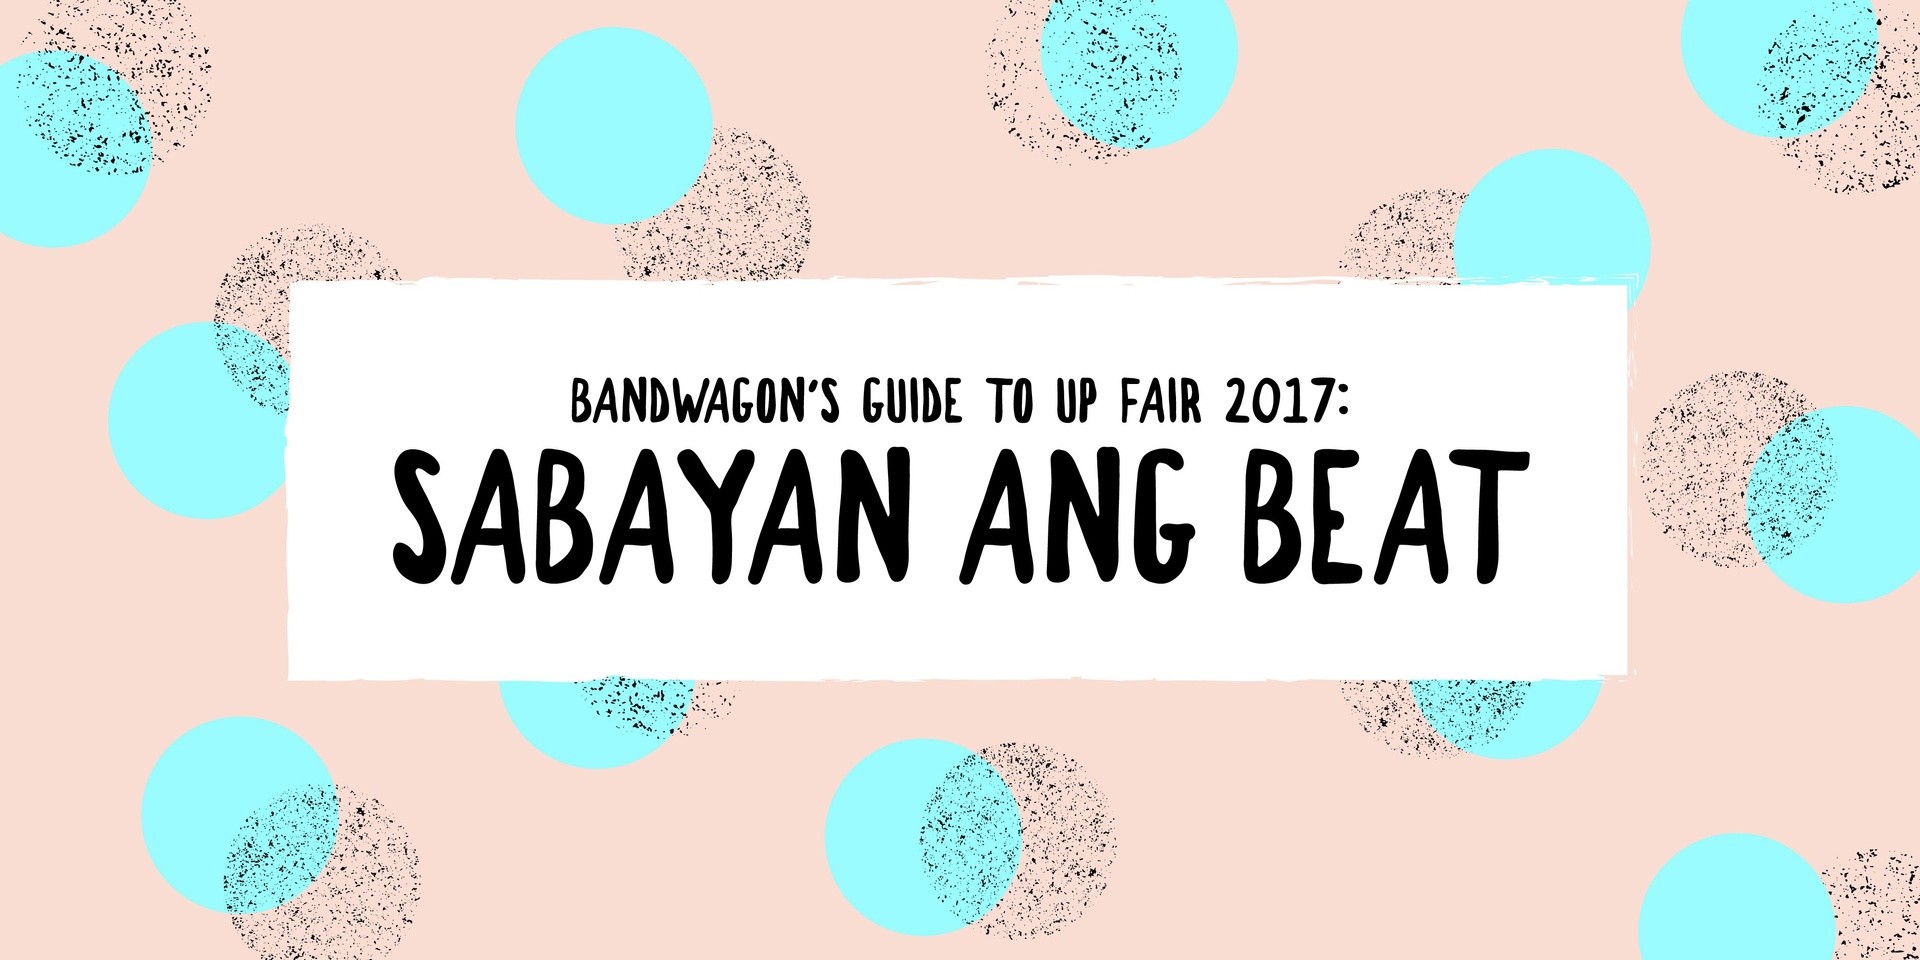 Bandwagon's Guide to UP Fair 2017: Sabayan ang Beat (with tips for the best UP Fair experience from Oh, Flamingo!, The Ransom Collective and Sound Architects)